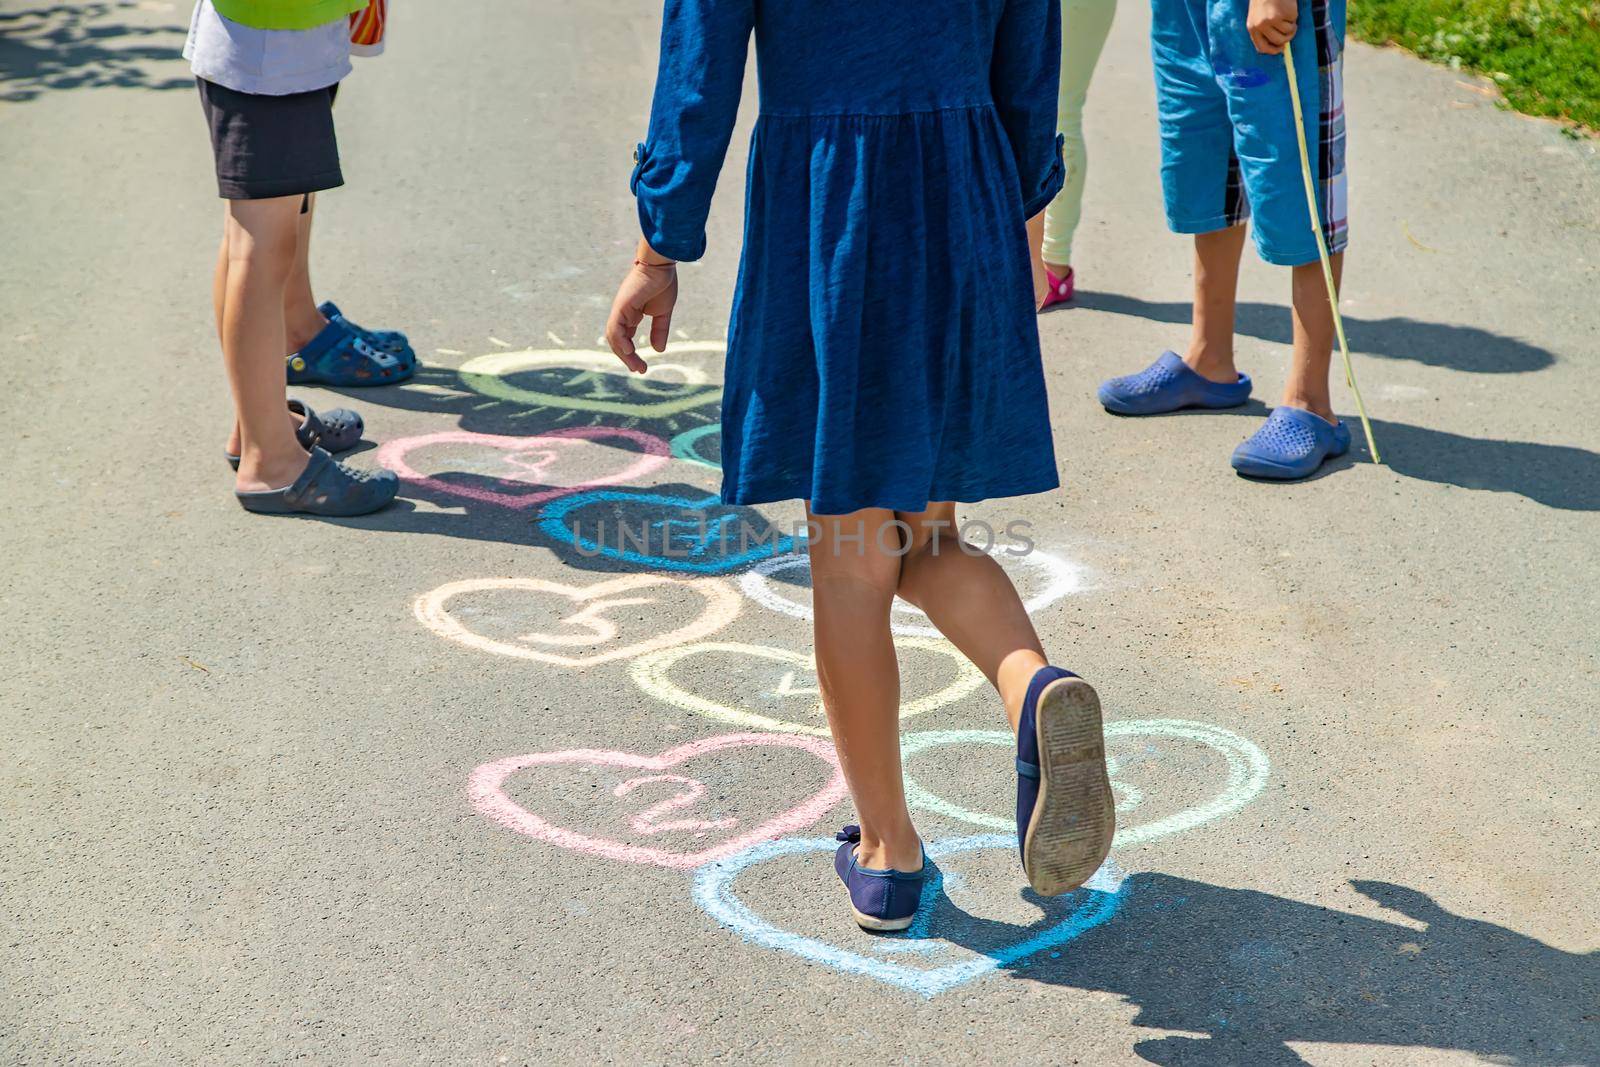 Children's hopscotch game on the pavement. selective focus. by yanadjana